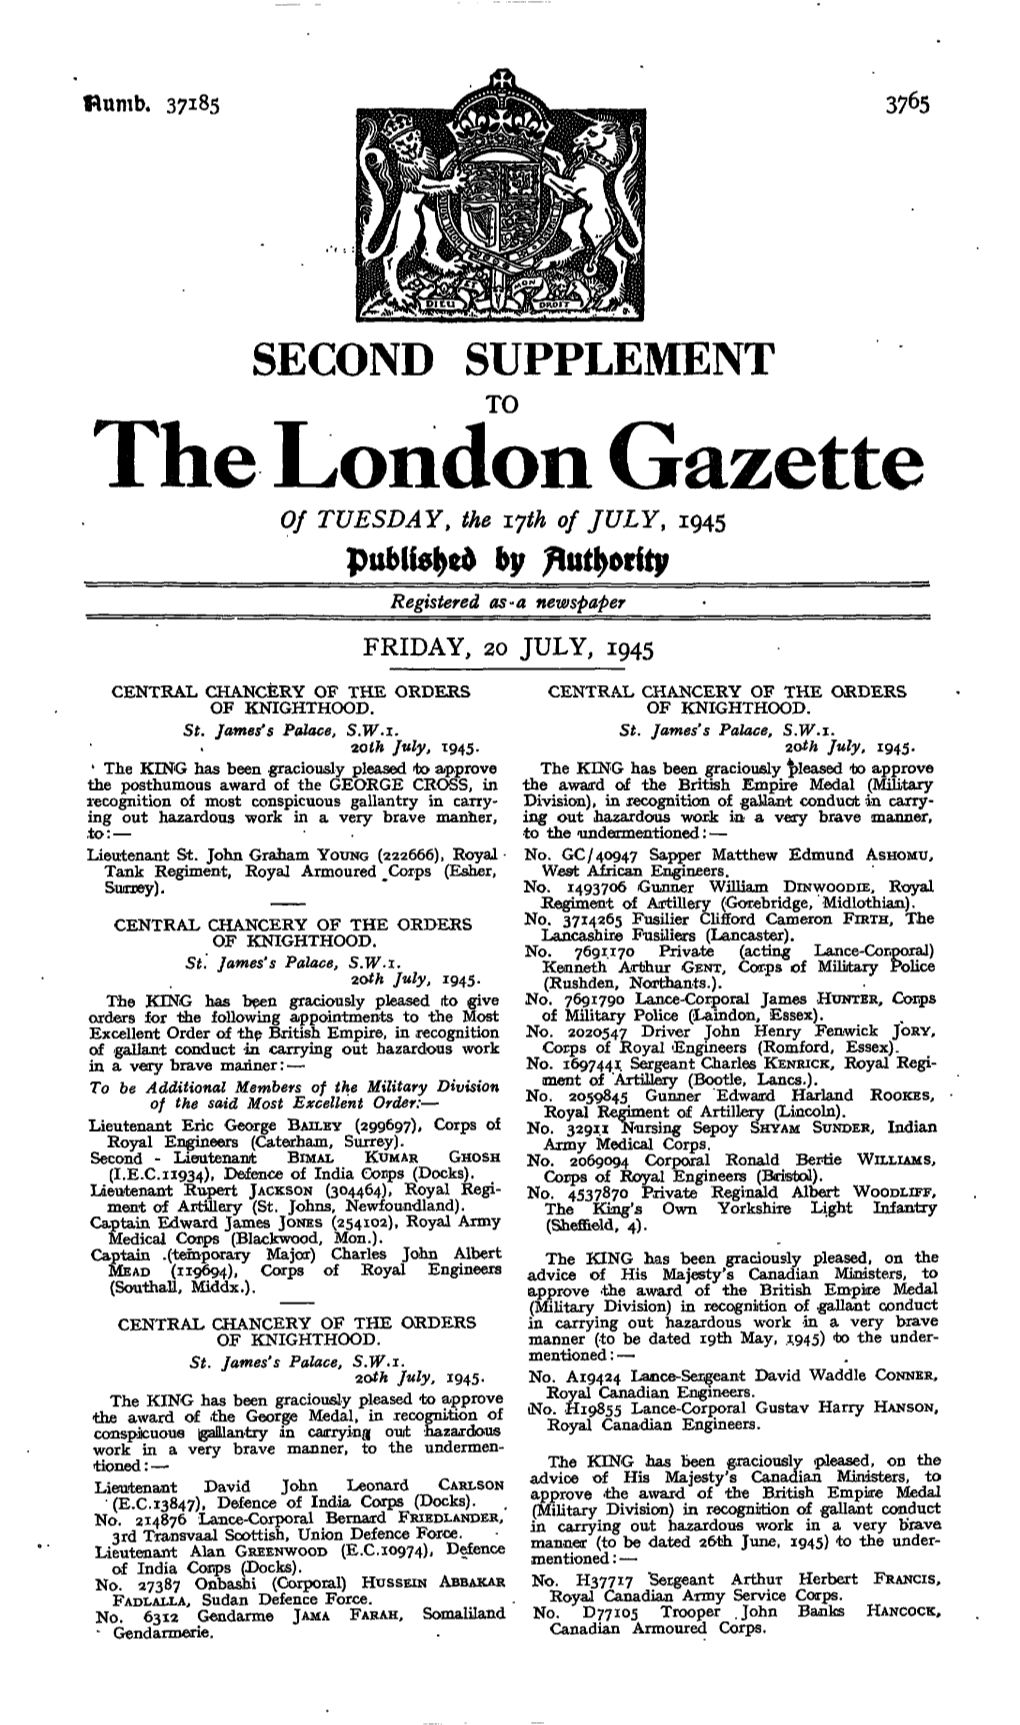 The London Gazette of TUESDAY, the Ijth of JULY, 1945 Published by Registered As-A Newspaper FRIDAY, 20 JULY, 1945